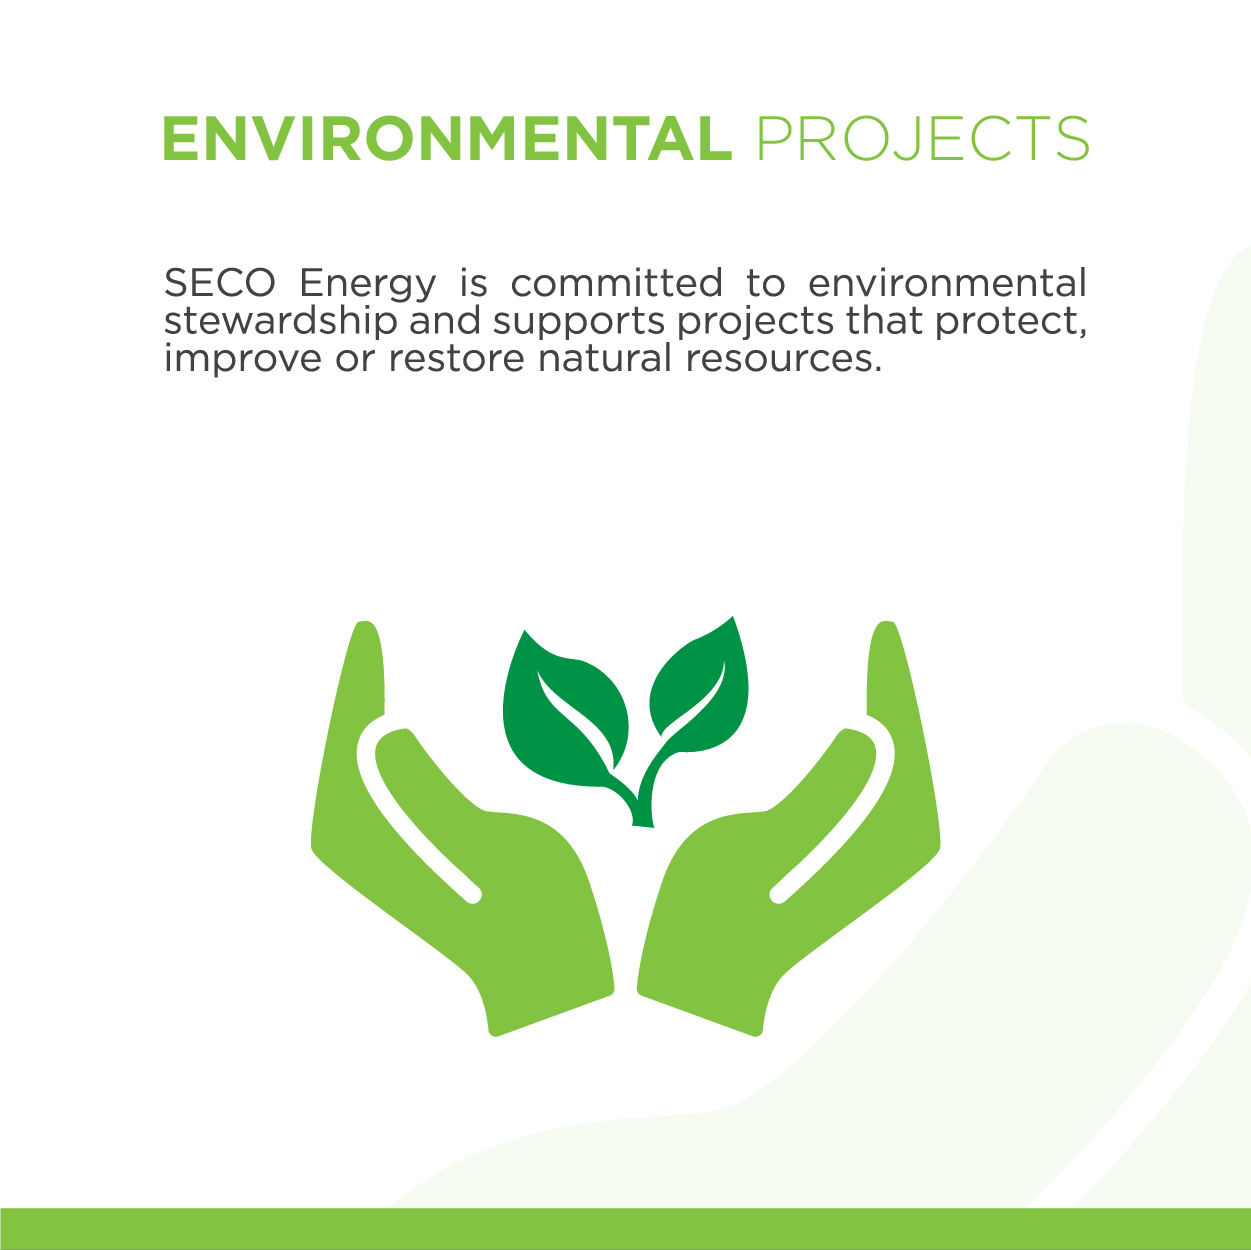 Environmental Projects SECO Energy is committed to environmental stewardship and supports projects that protect, improve or restore natural resources.